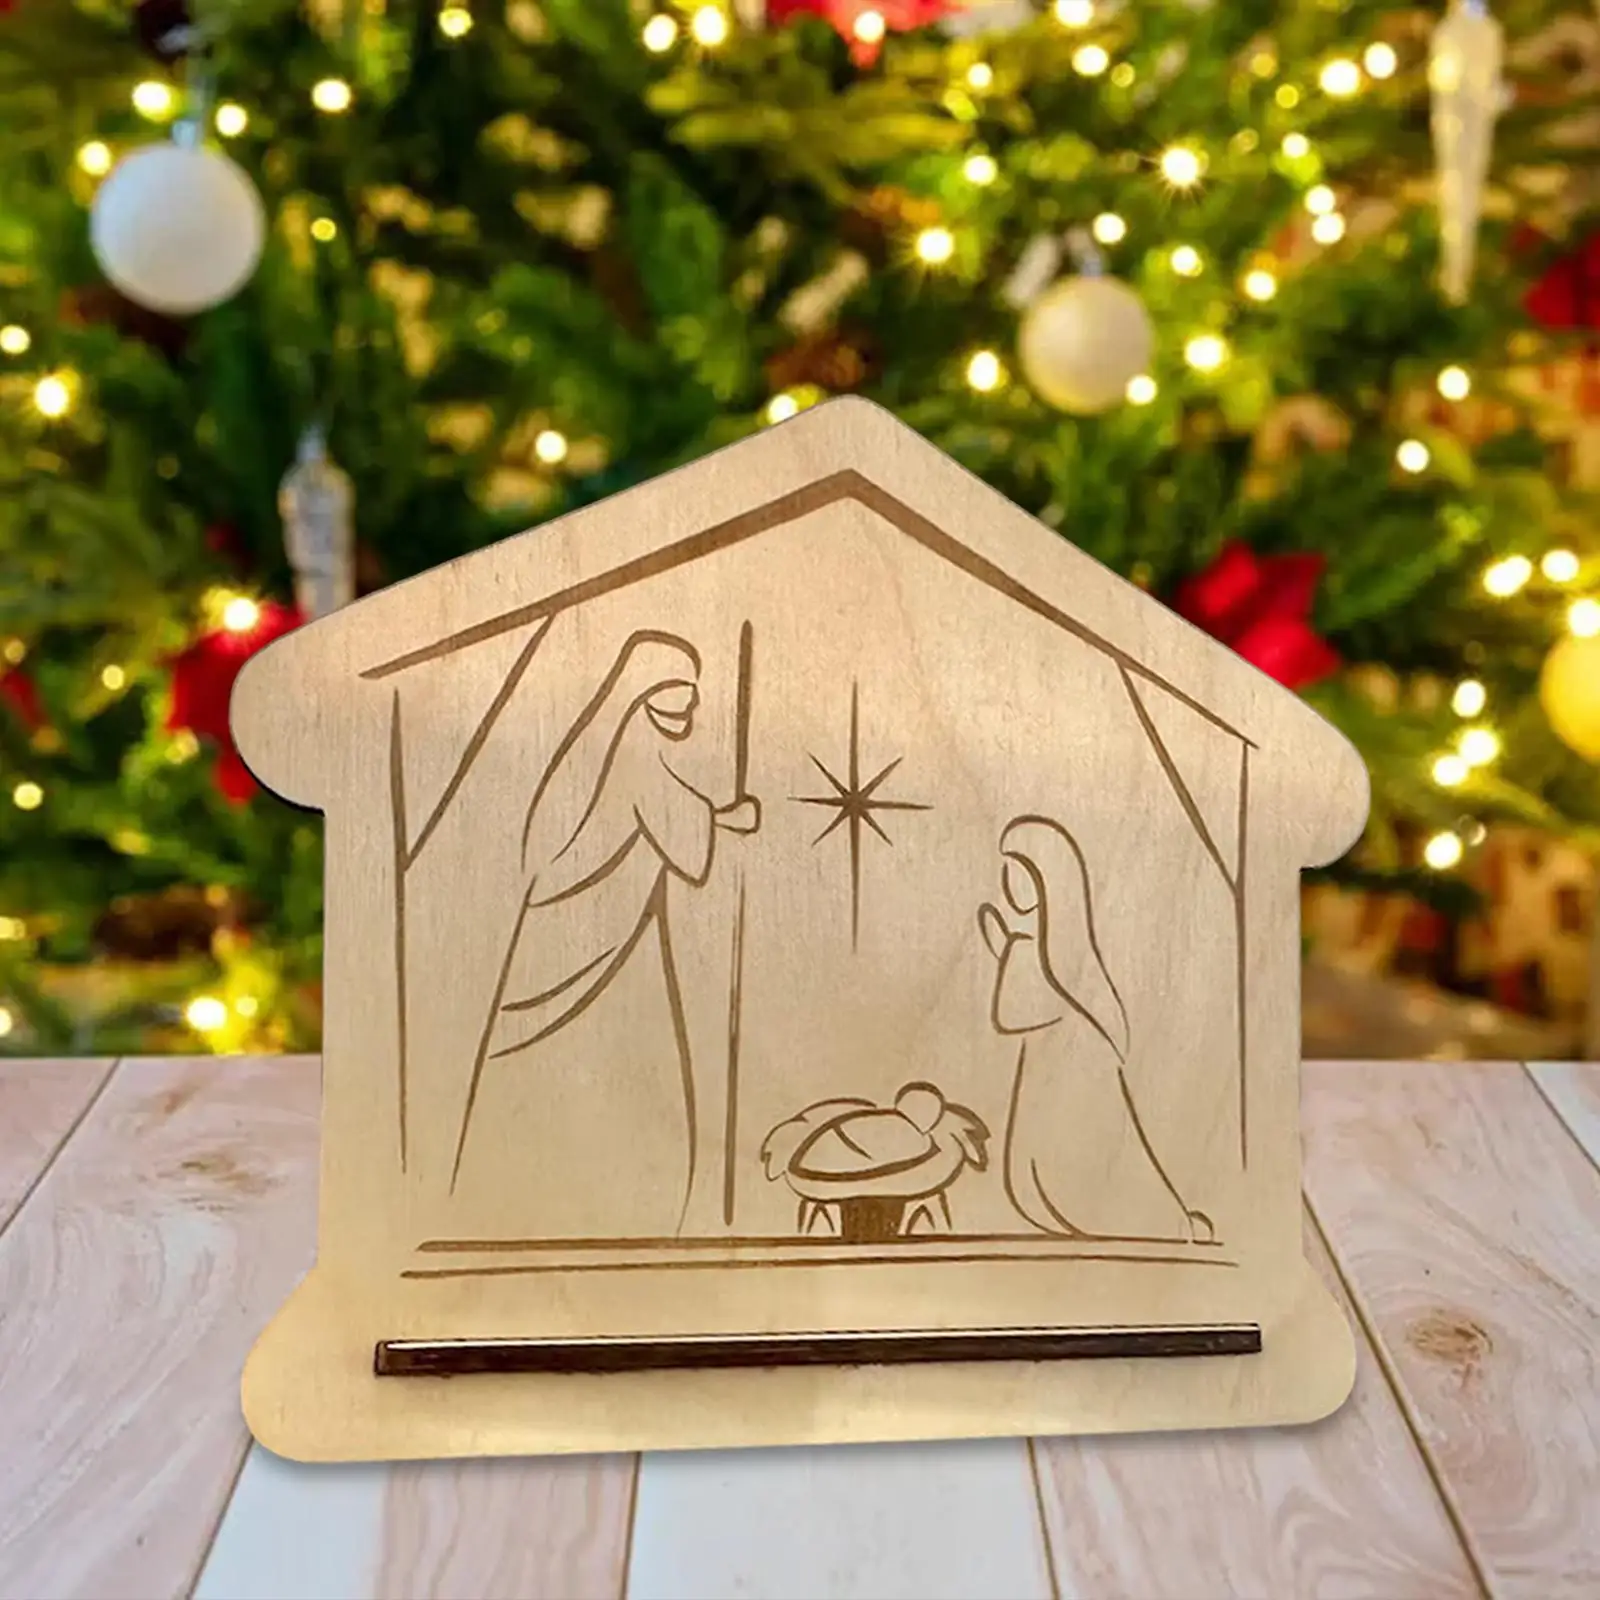 The Birth of Jesus Decorations Wood Religious Gift Xmas Decor Christmas Decorations for Table Centerpiece Home Indoor Fireplace